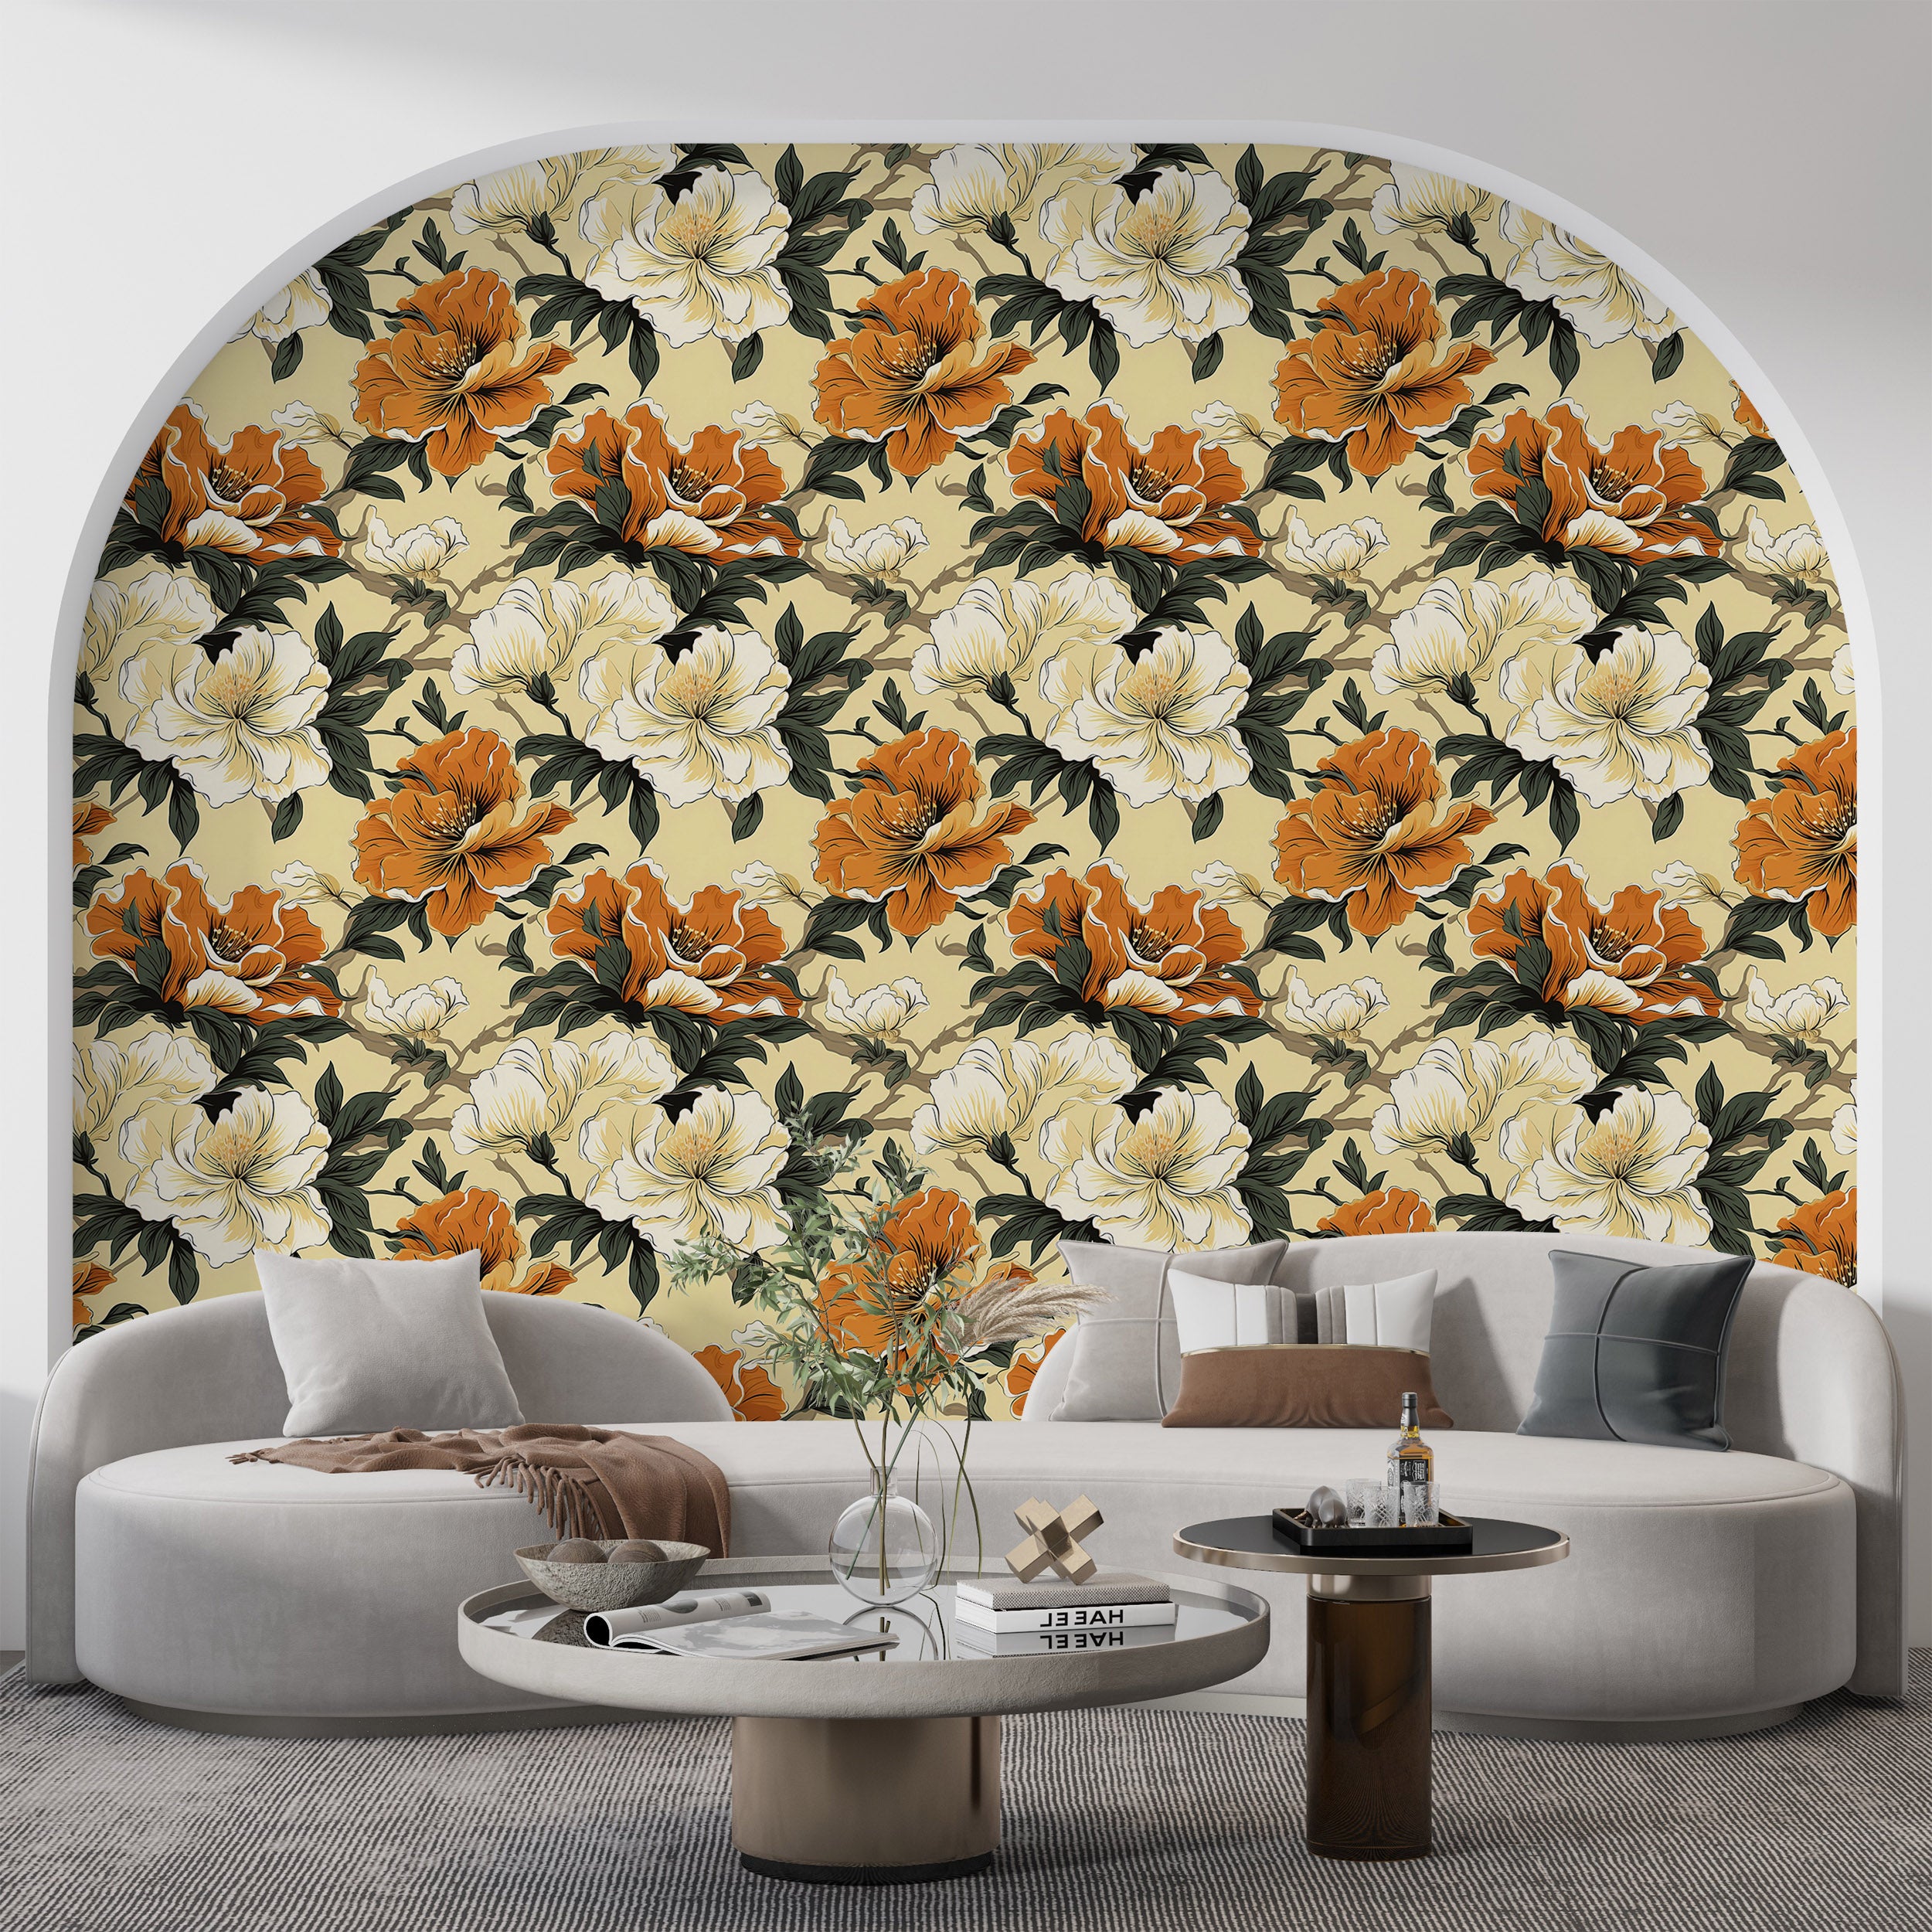 Soothing Orange and Beige Floral Wallpaper